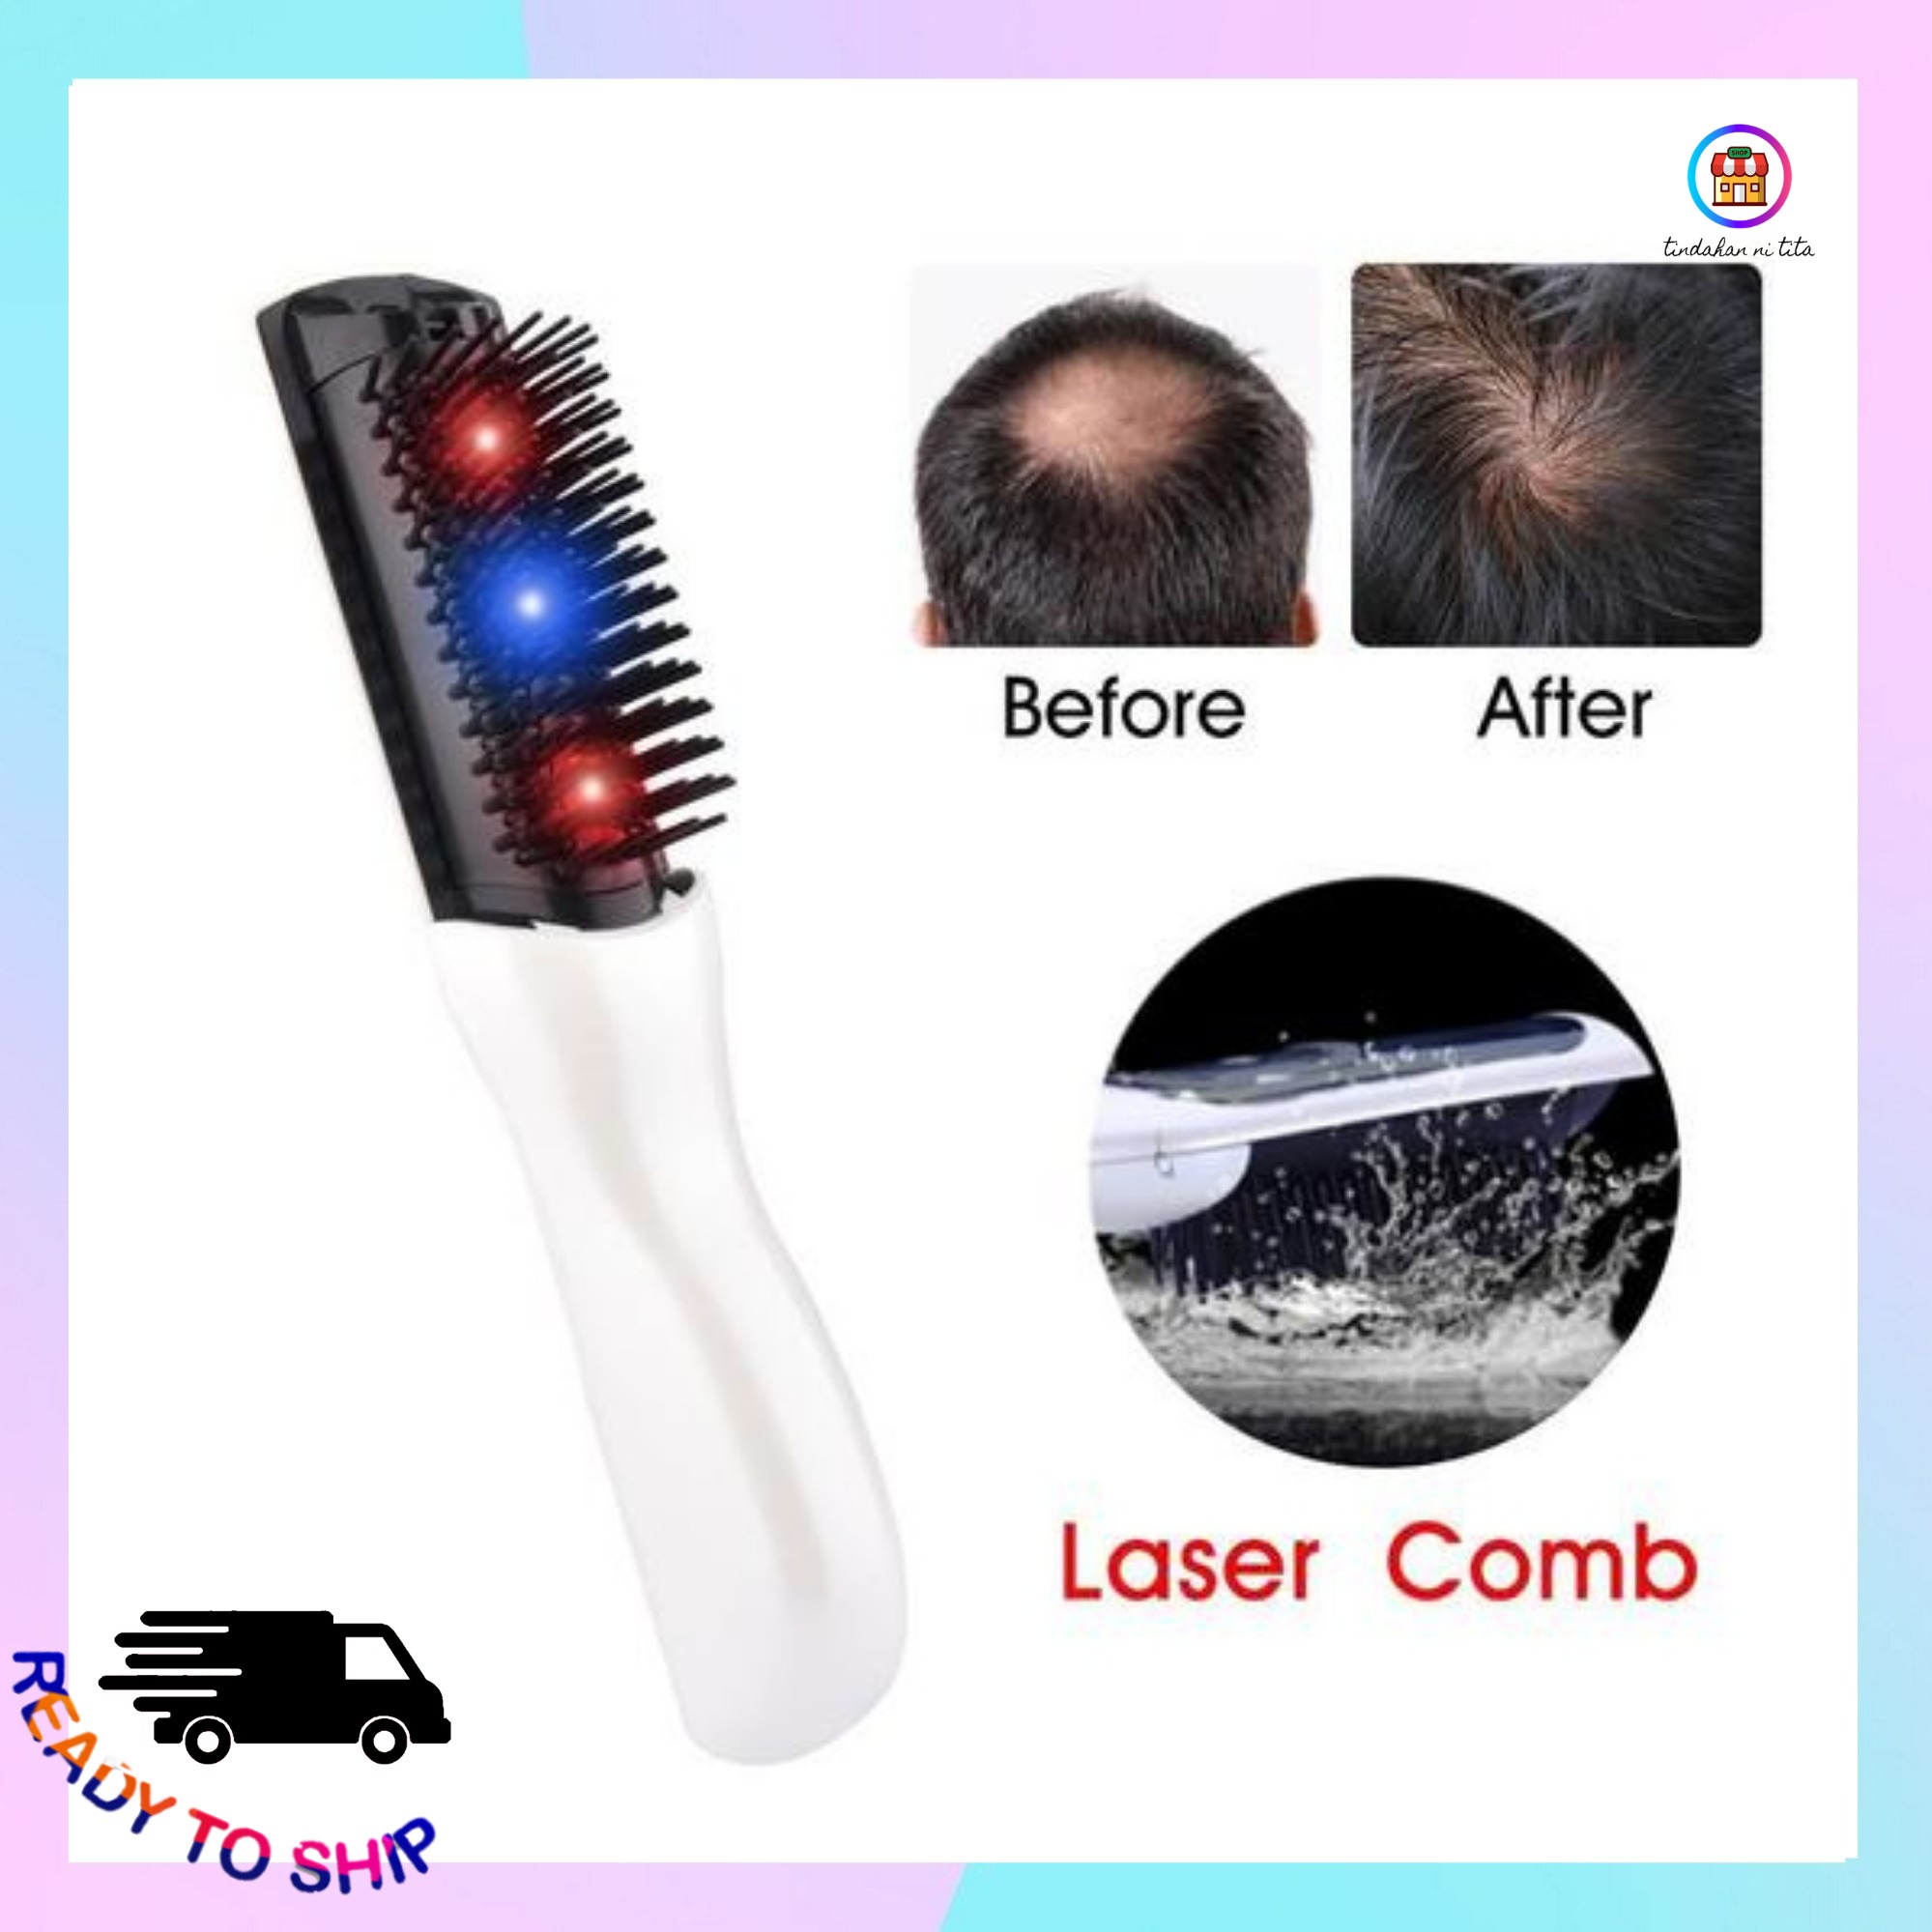 ORIGINAL Loss Hair Growth Comb, Personal Care Laser Comb Hair Brush,  Electric Wireless Infrared Ray Massage Comb, Laser Hair Growth Comb  Treatment, Electric Laser Hair Growth Comb, Hair Comb Home Medical Hair